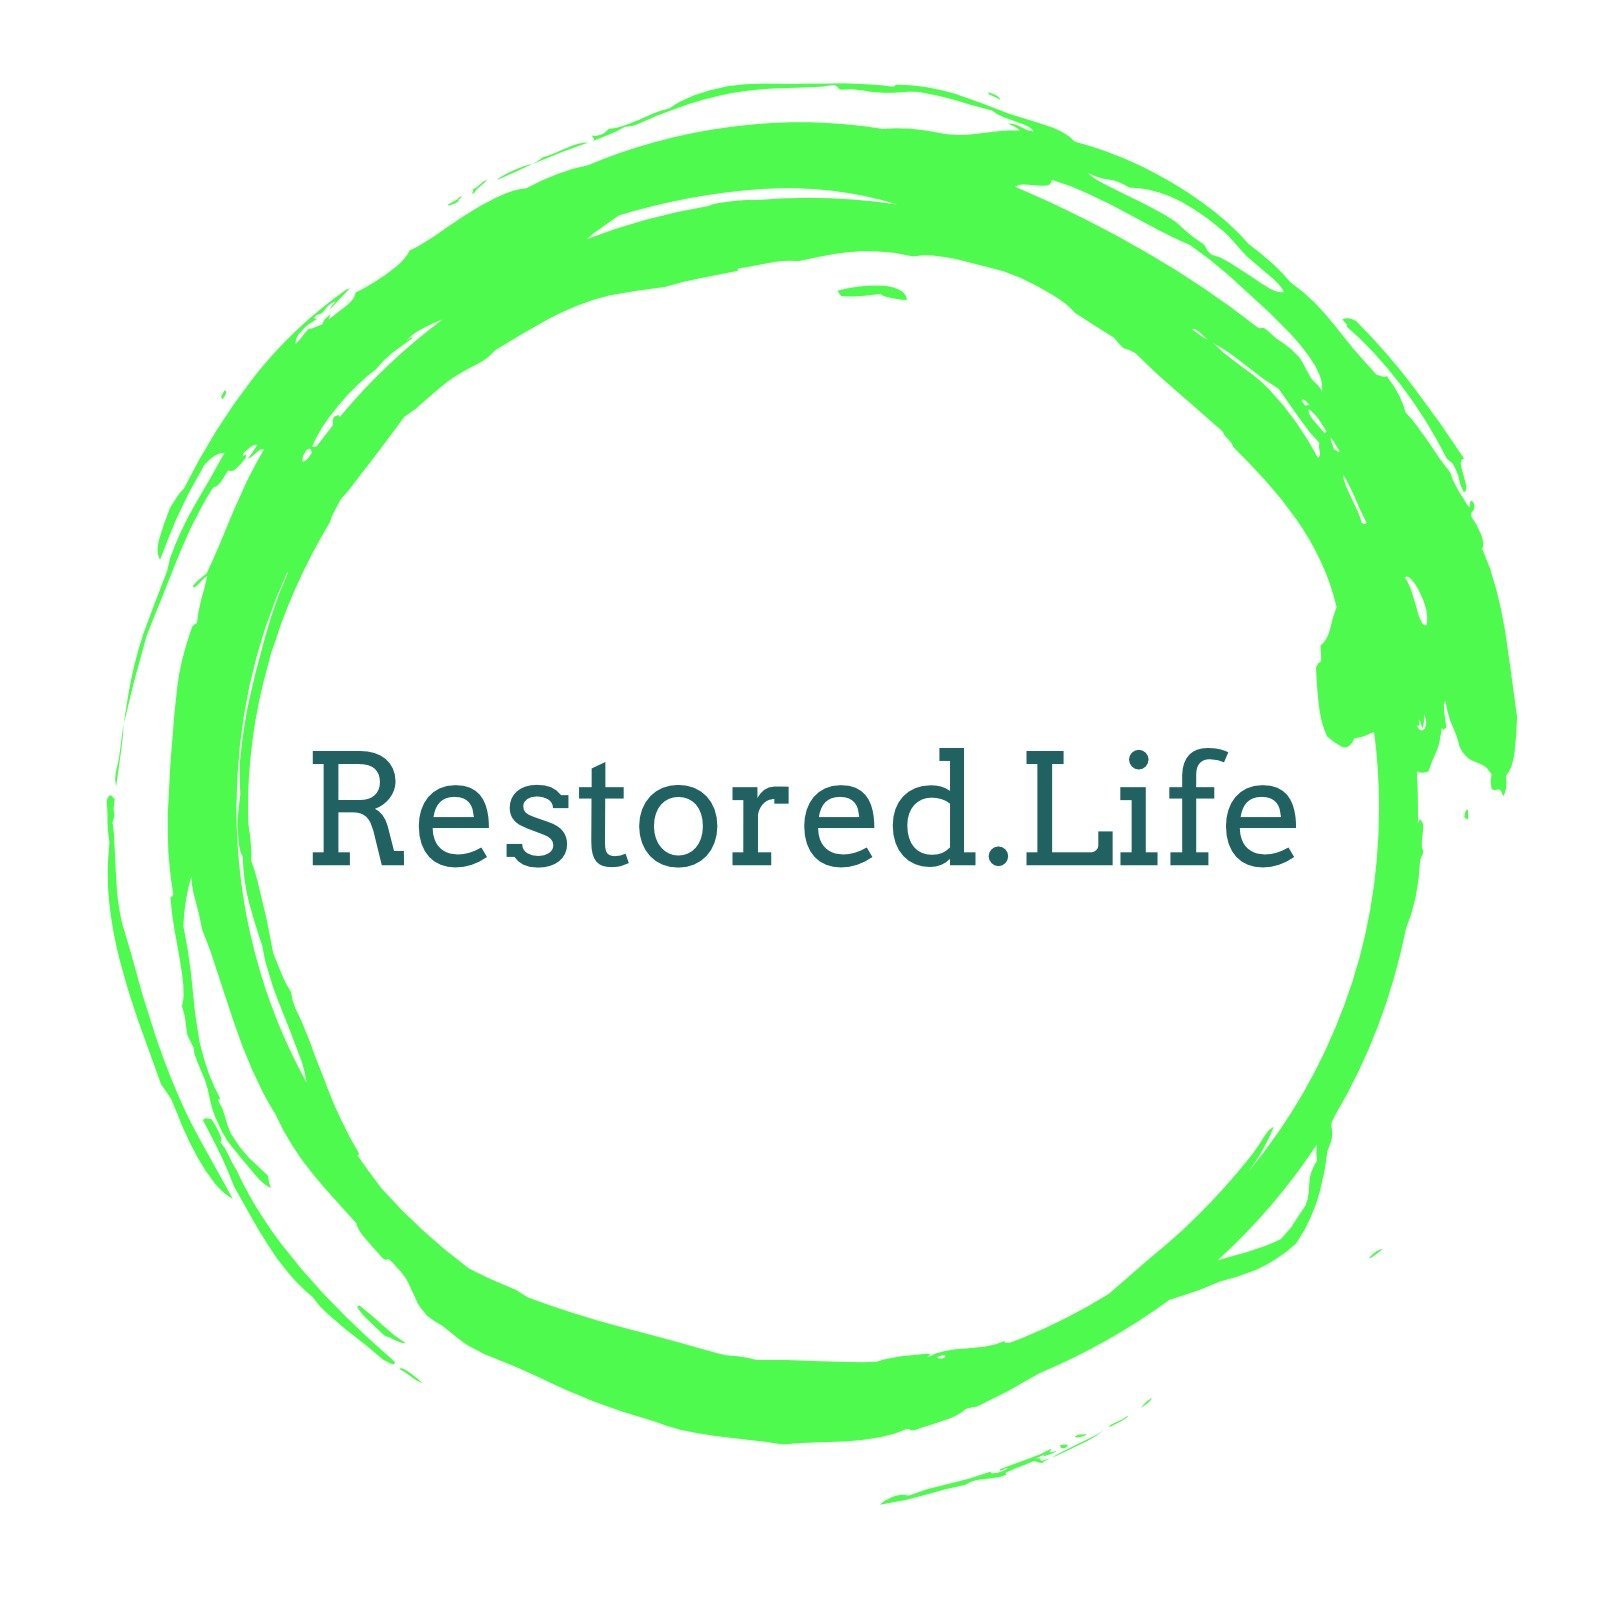 Restored Life is a nonprofit counseling and research center helping people overcome porn addiction, sex addiction, betrayal trauma, or infidelity.